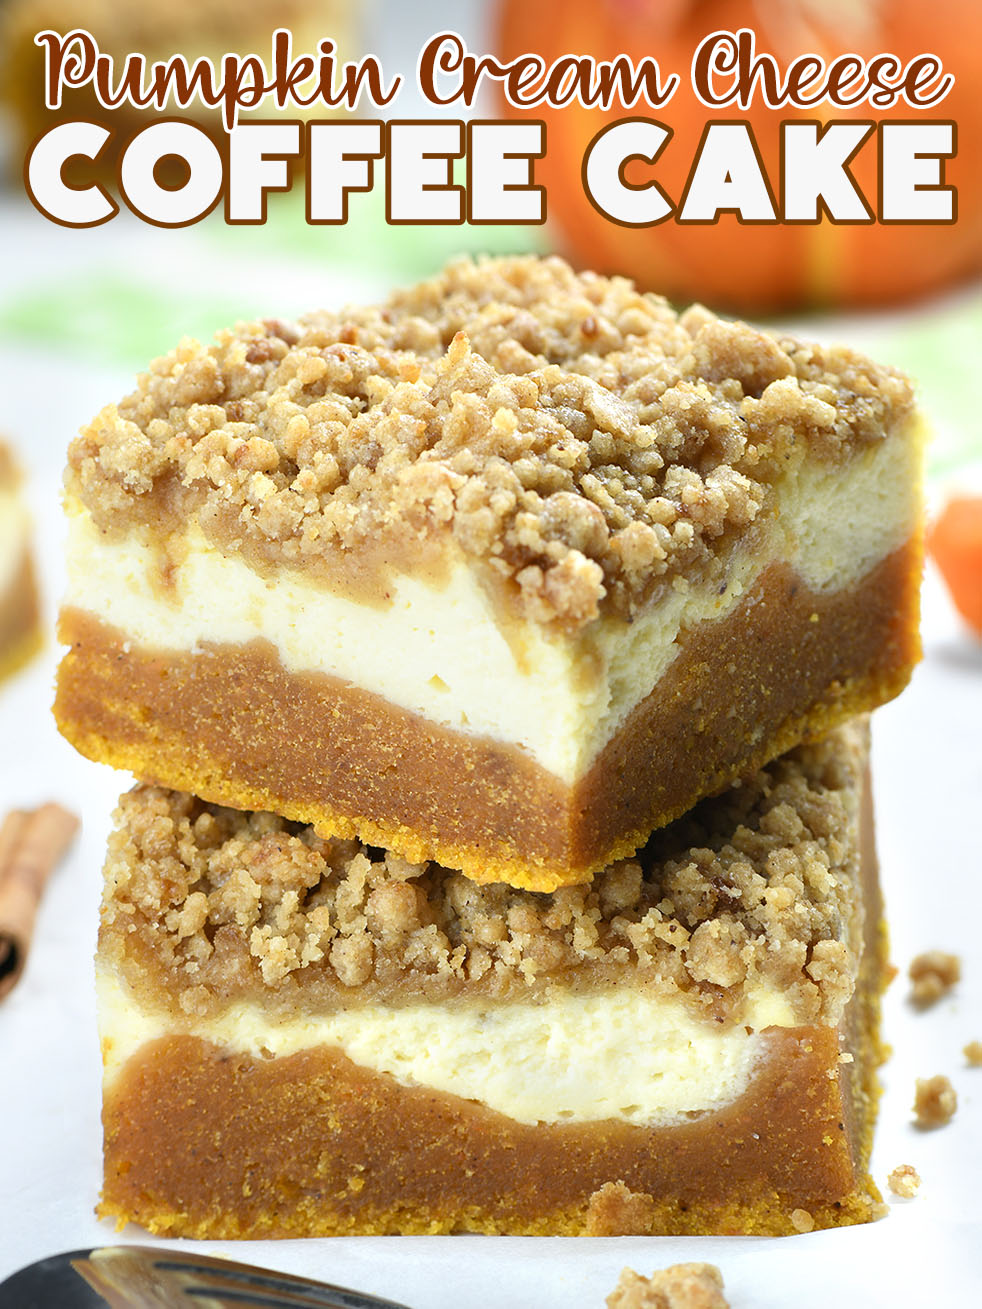 Two pieces of Pumpkin Surf Cheese Coffee Confection with streusel crumbs on the top, with pumpkin decoration behind.